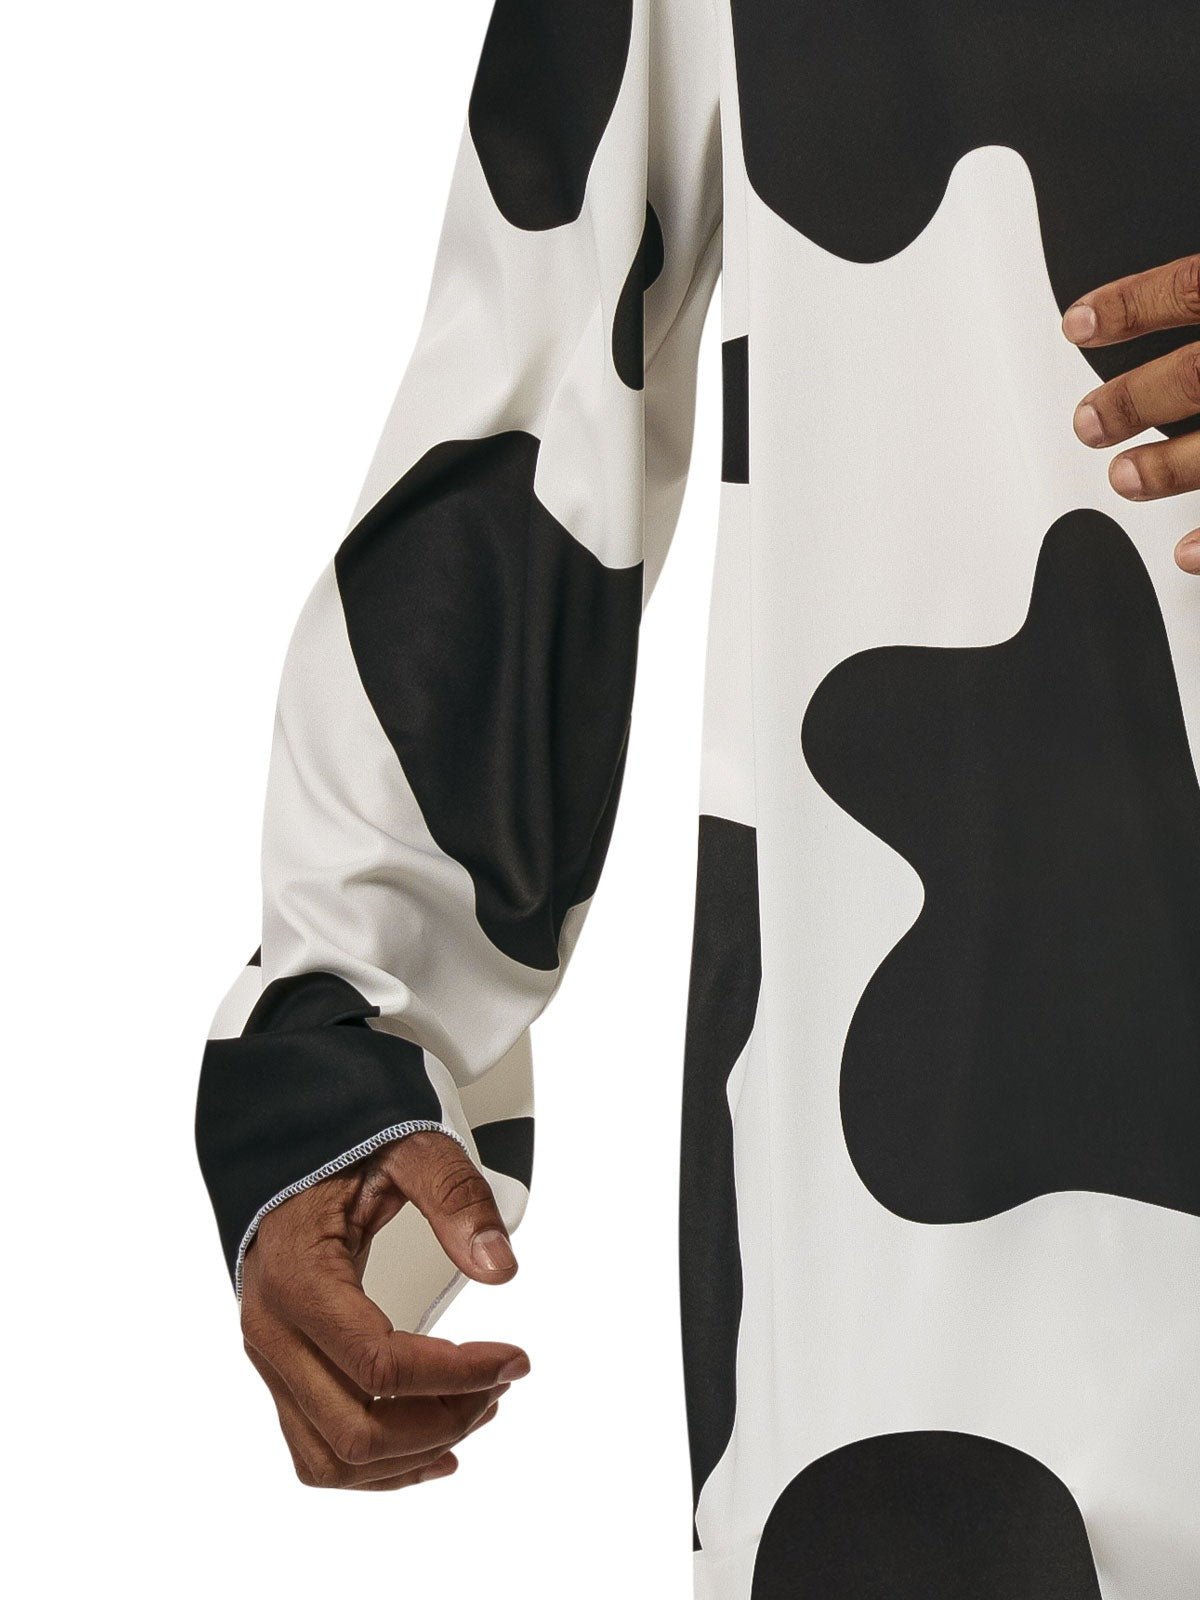 Cow Furry Onesie Costume Adults